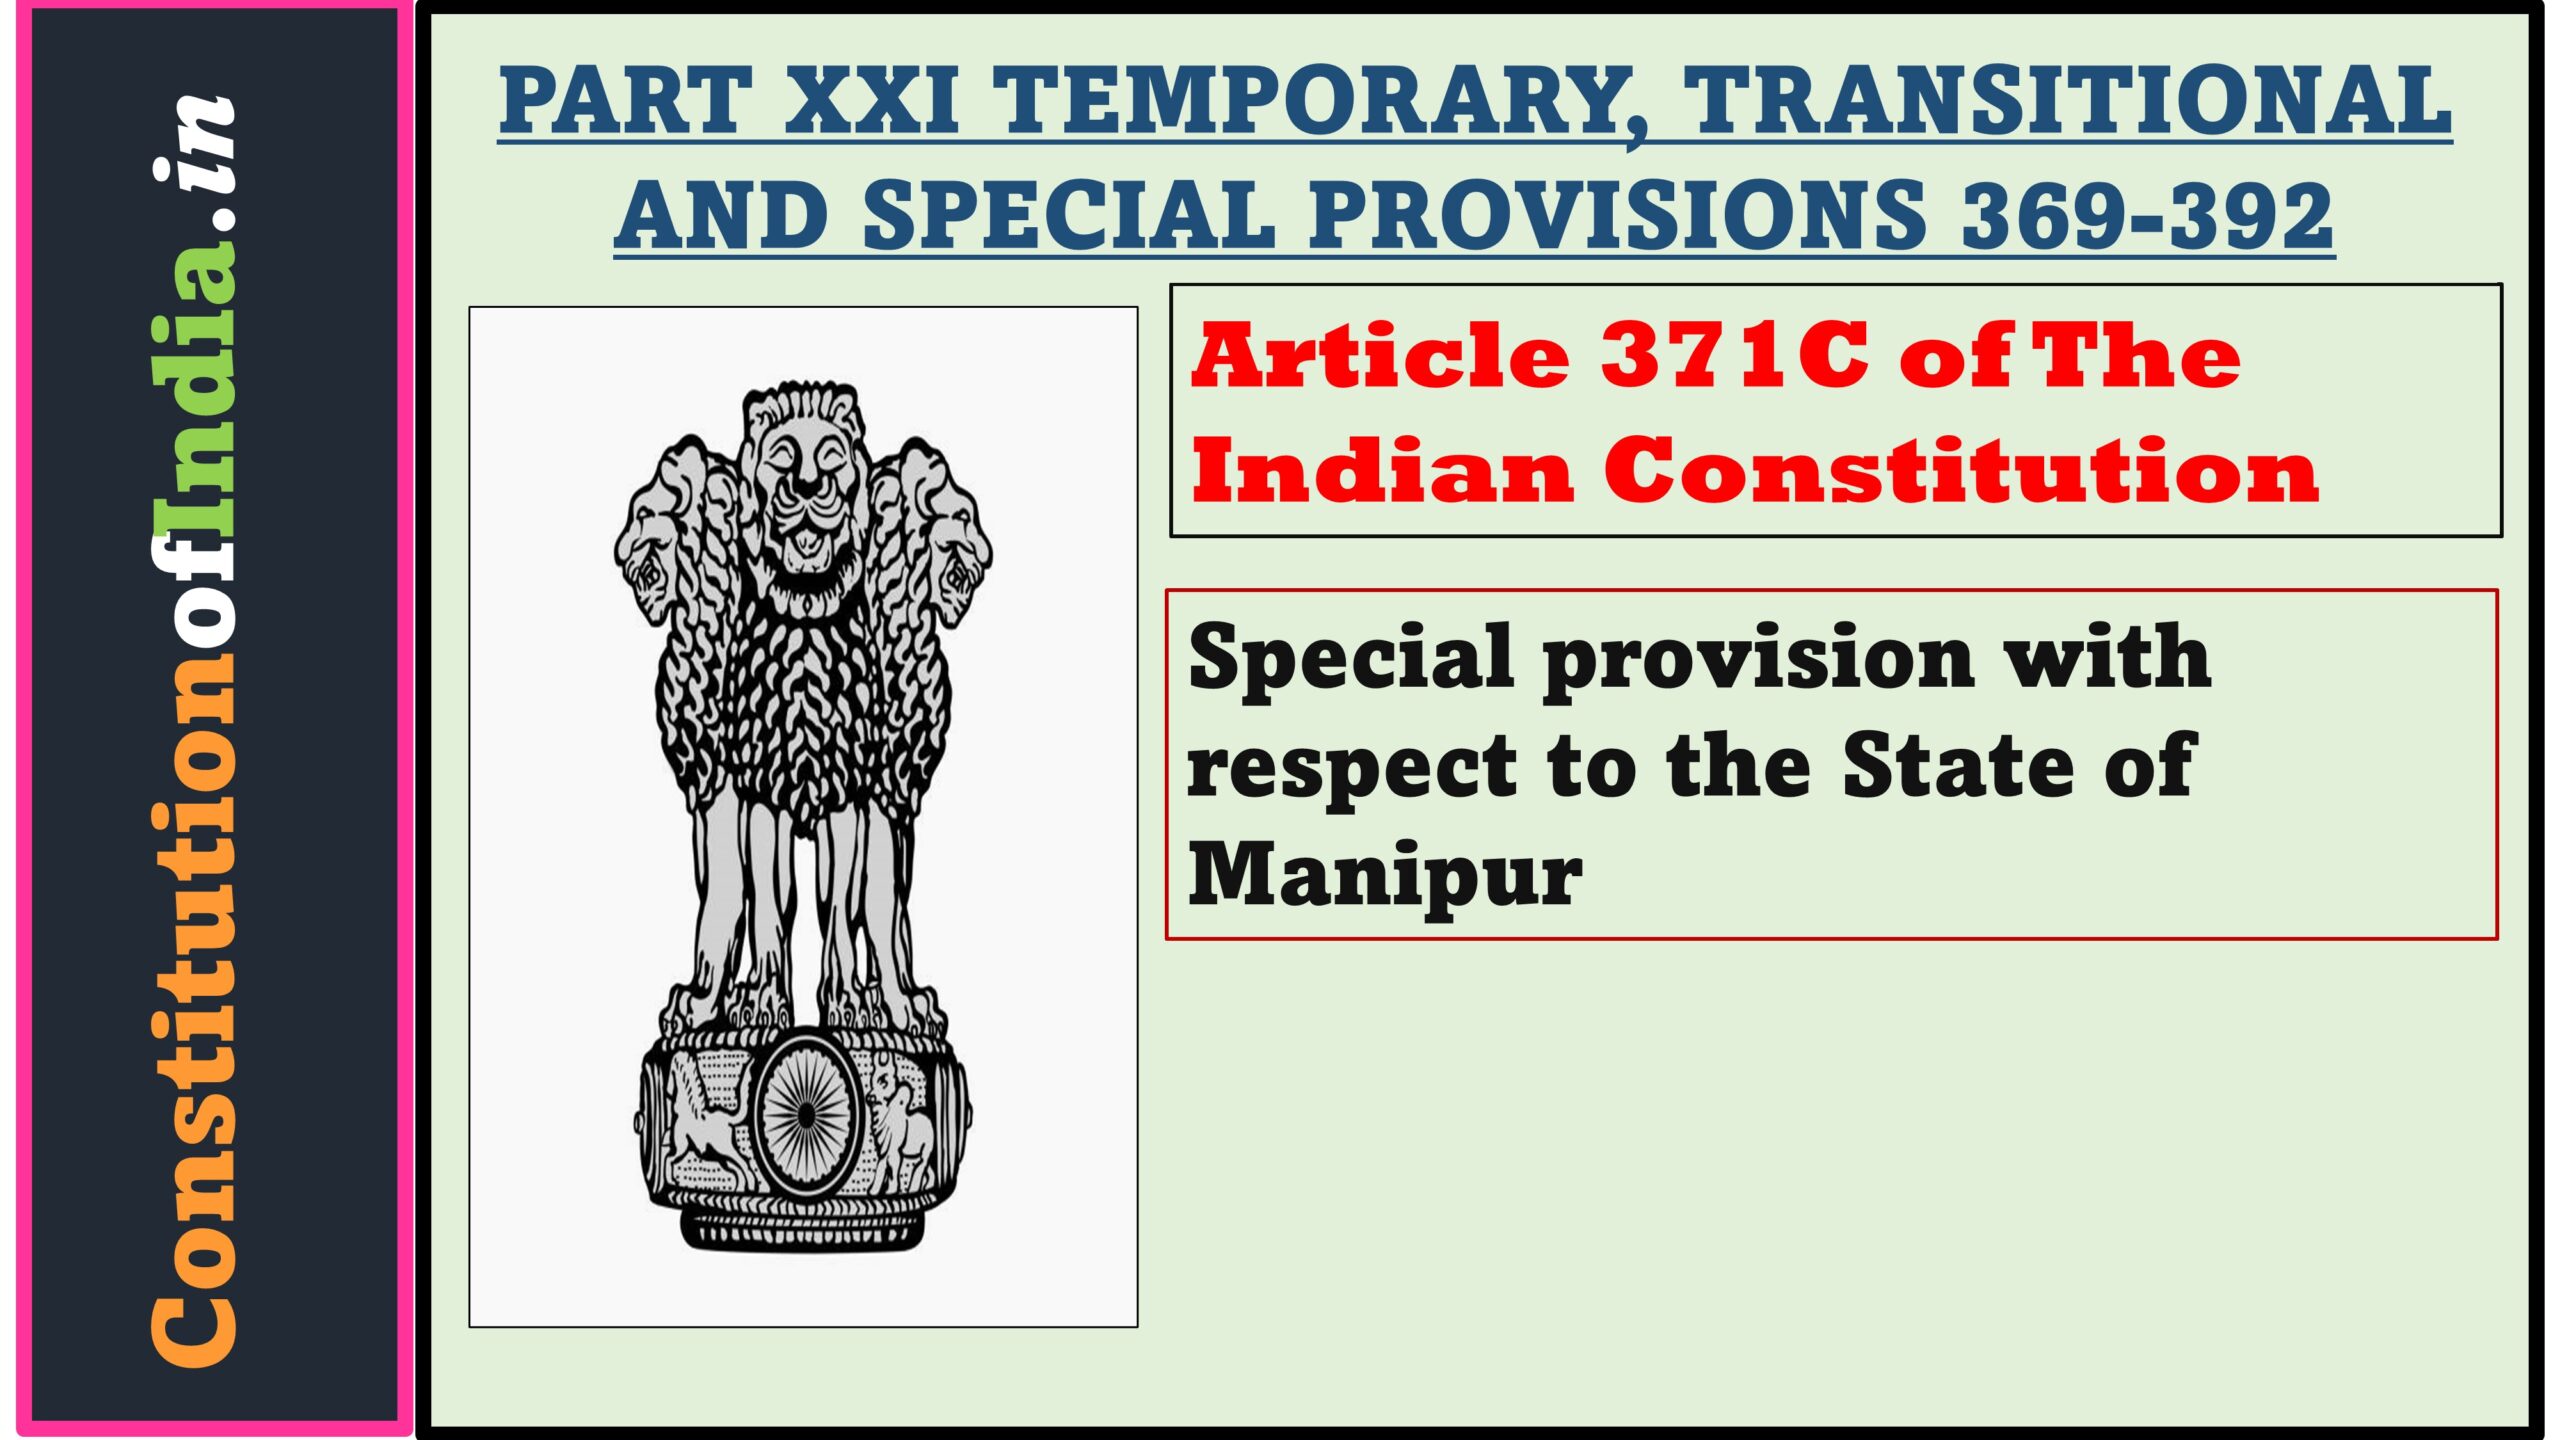 Article 371C of The Indian Constitution